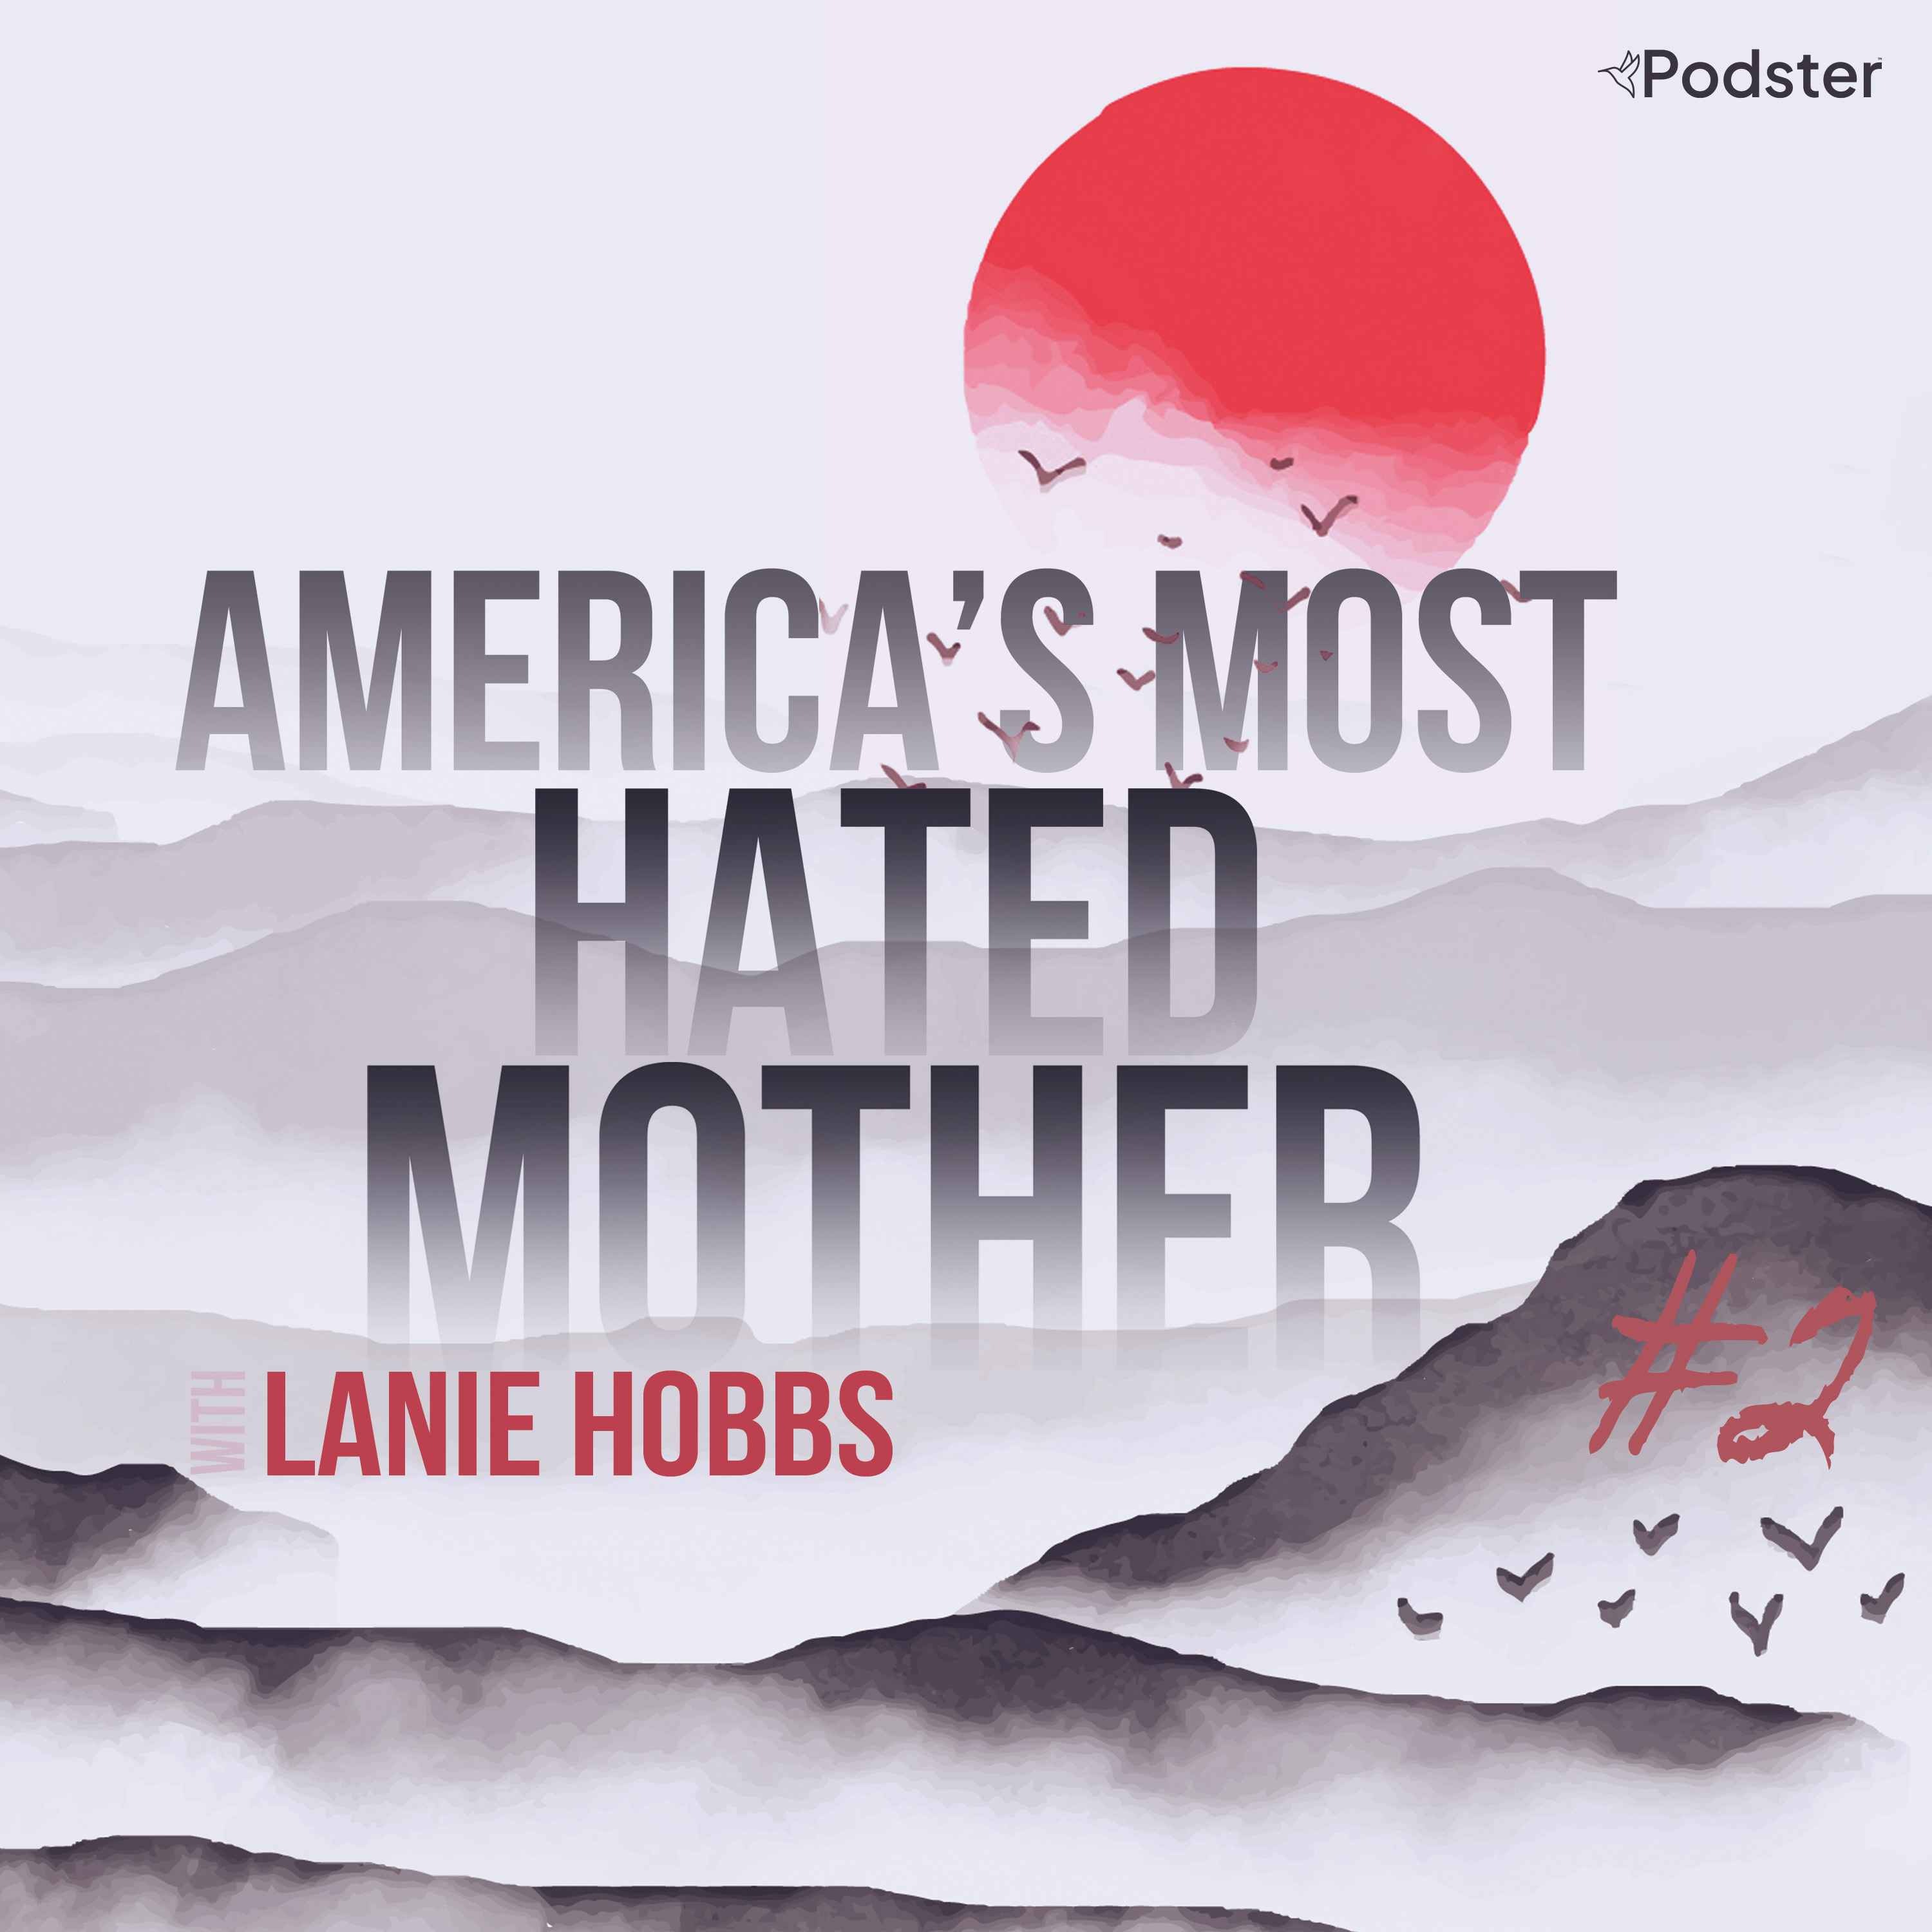 6. America's most hated mother - part 2